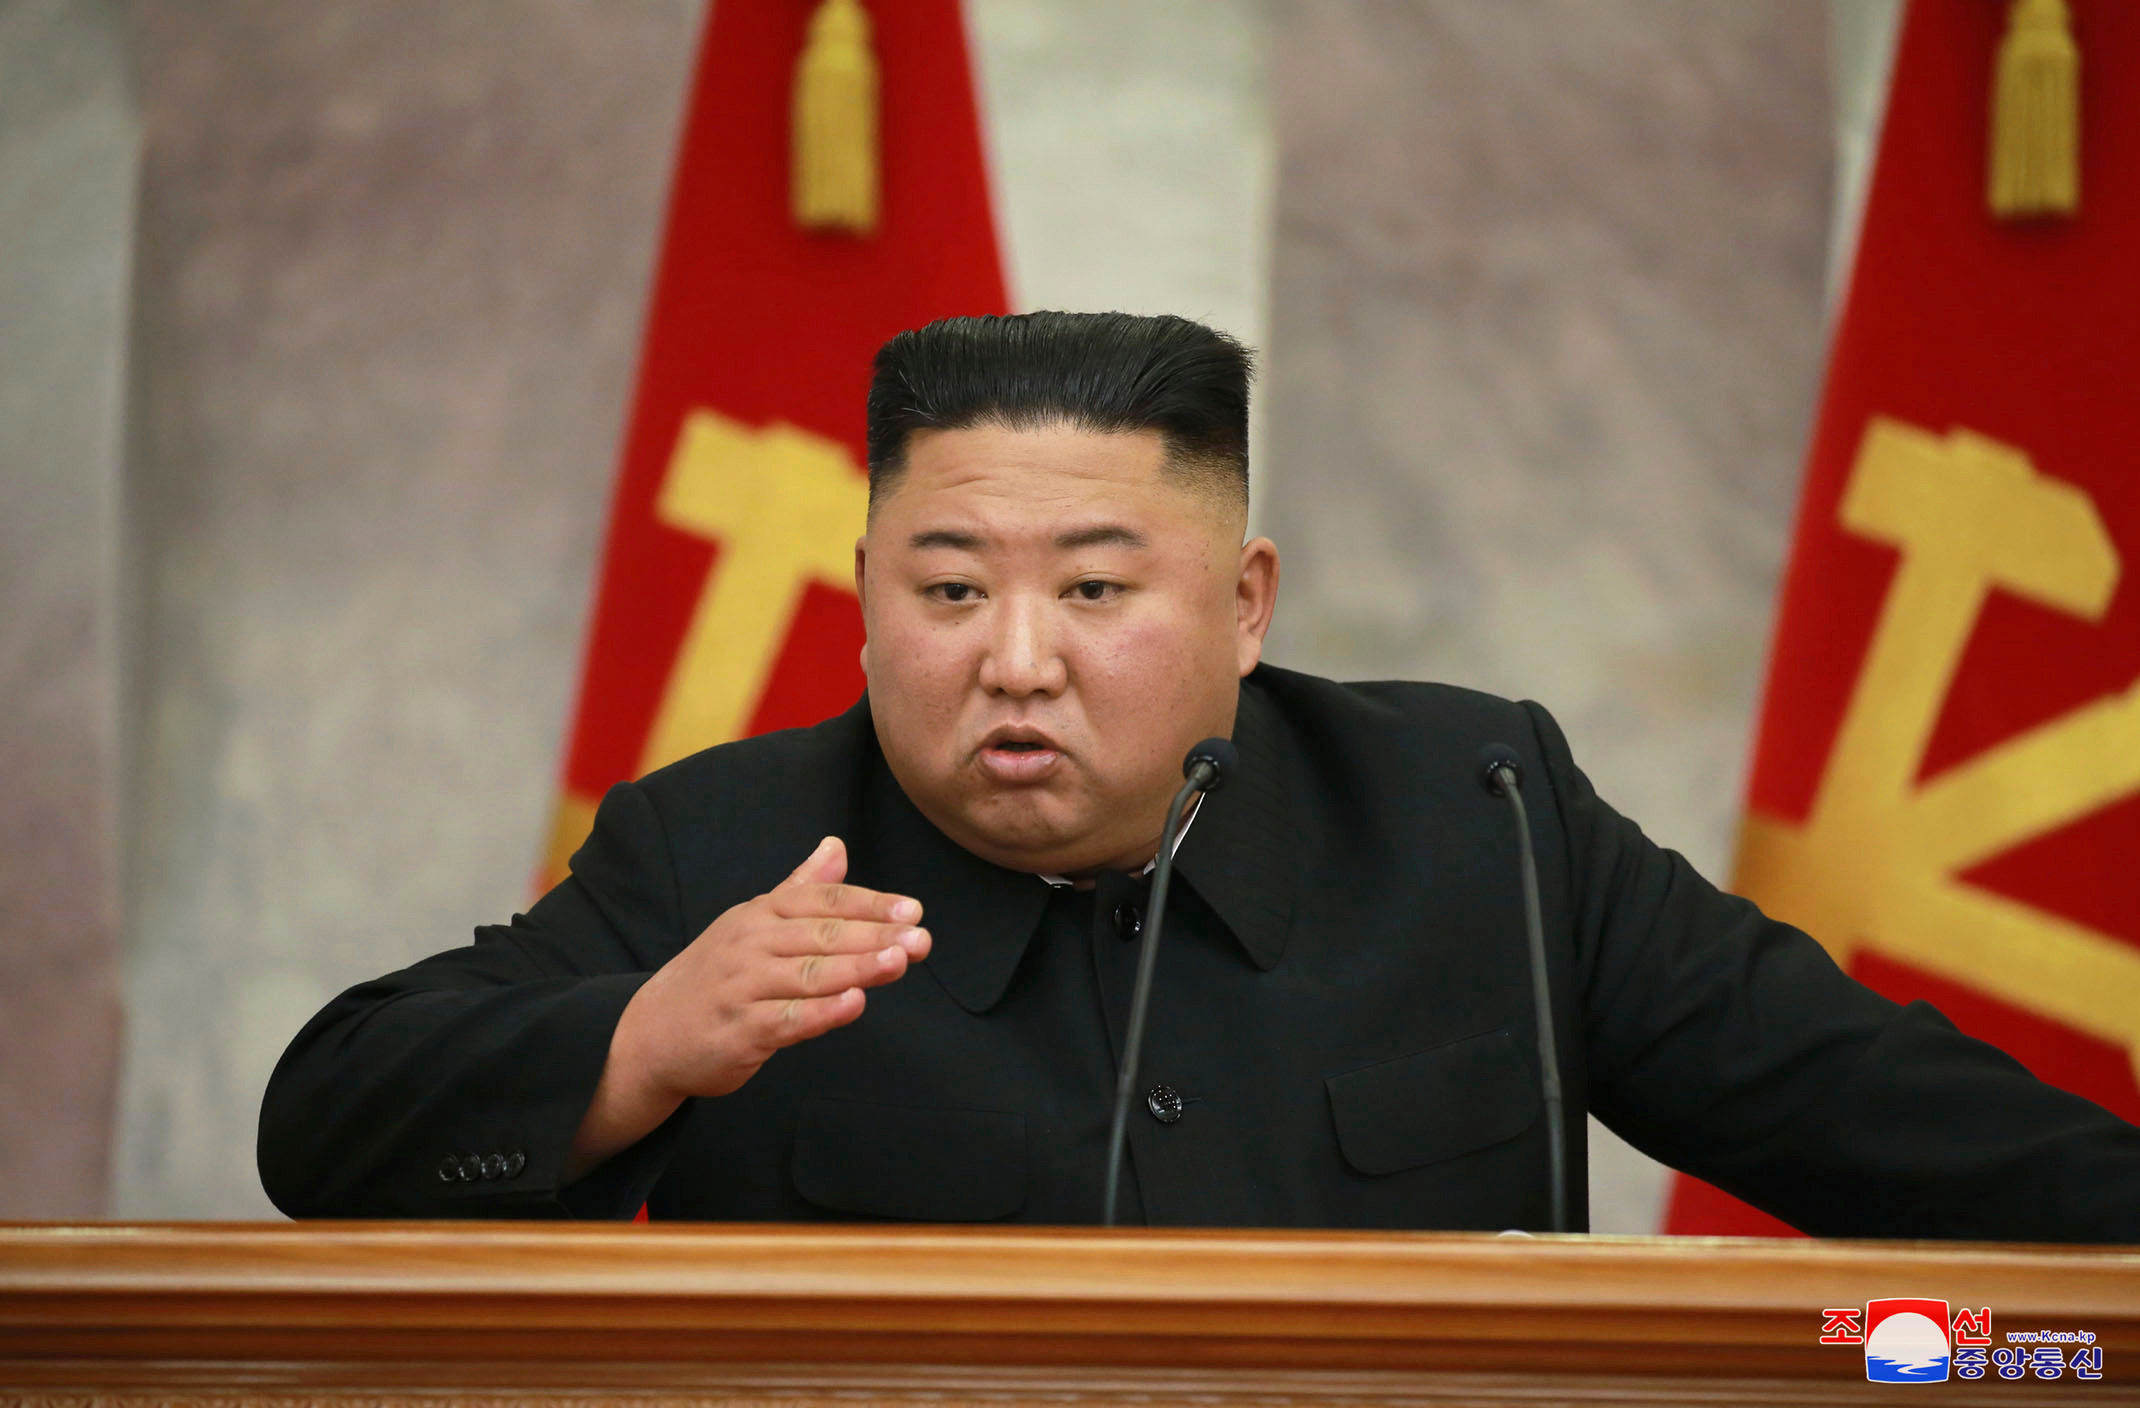 Kim Jong-un is in coma, delegates power to sister: Reports